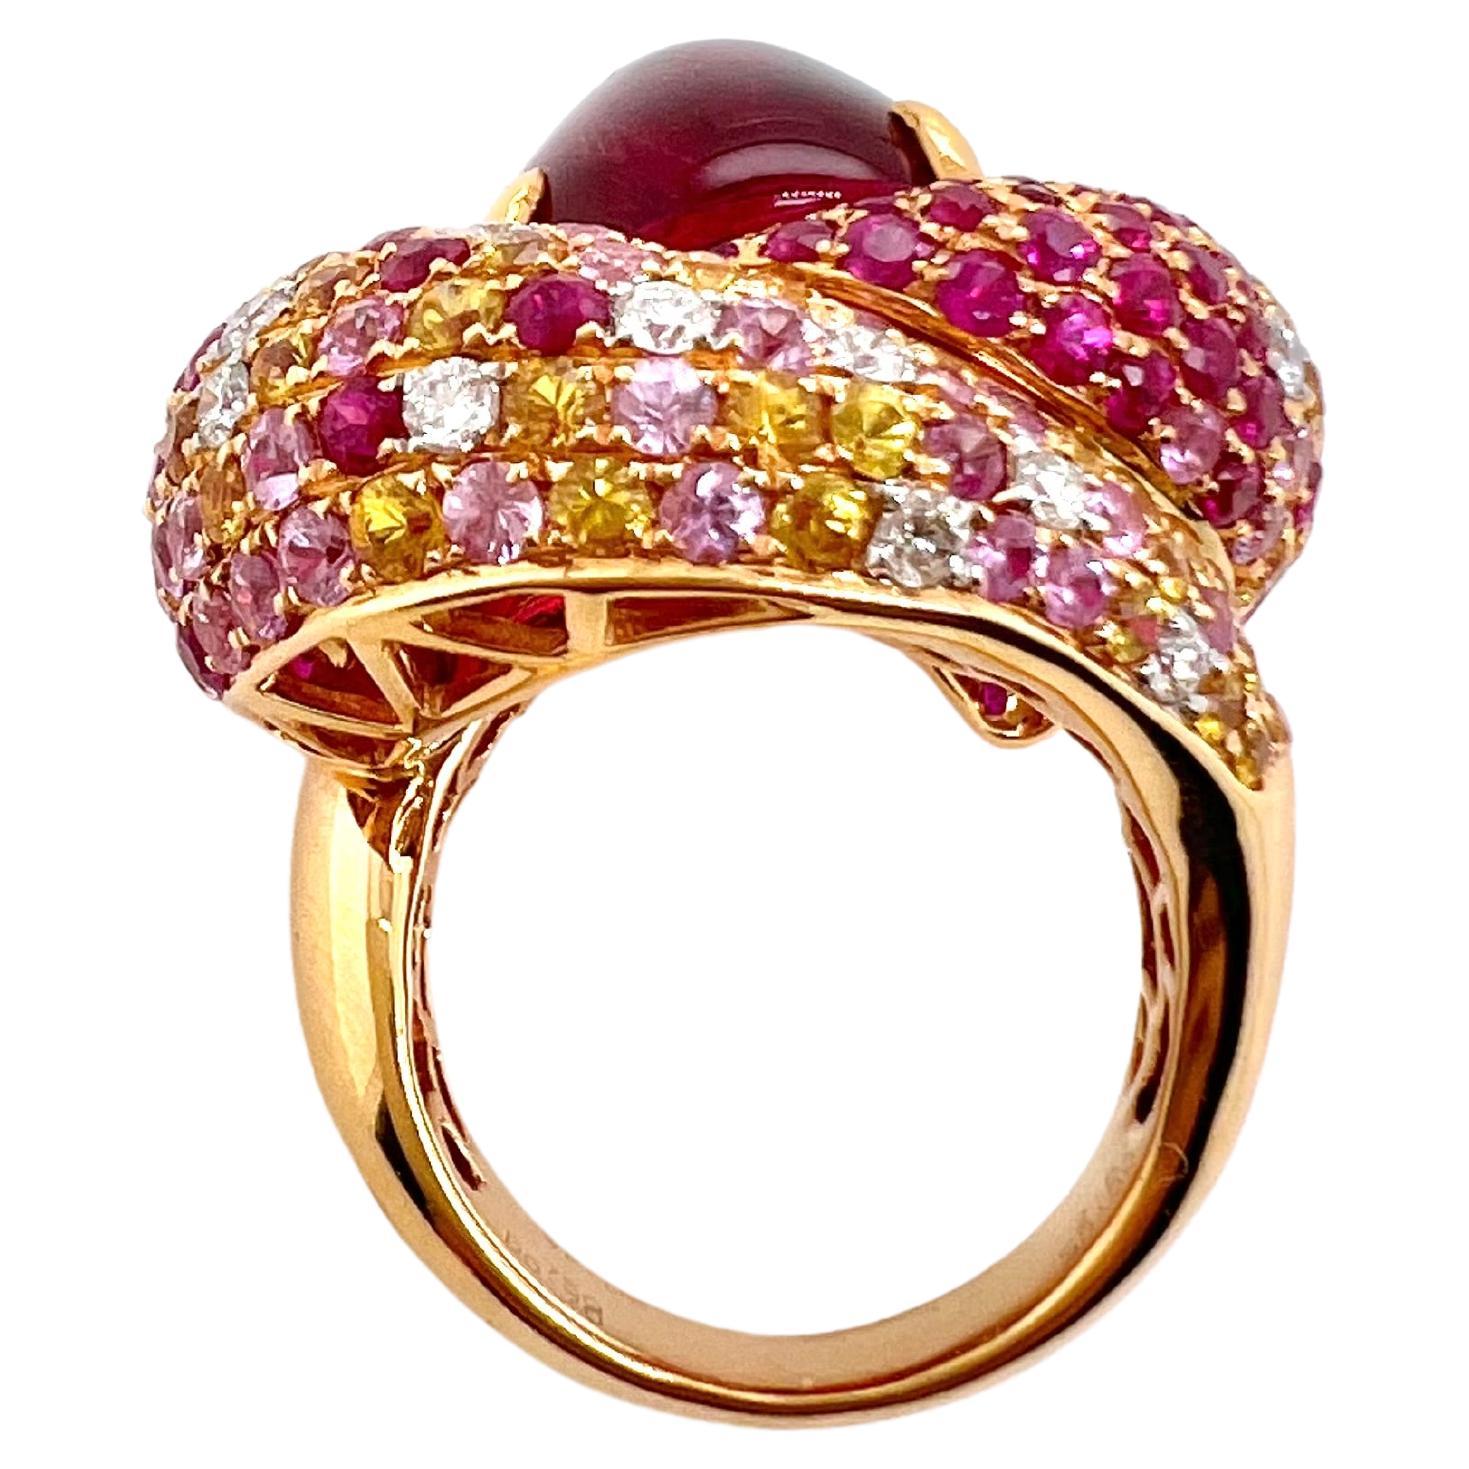 This gorgeous cabochon pink tourmaline ring is custom made that is designed to capture everyone's attention.  The pink and yellow sapphires are scattered along with the round brilliant diamonds to give the ring a strawberry shortcake appearance. 